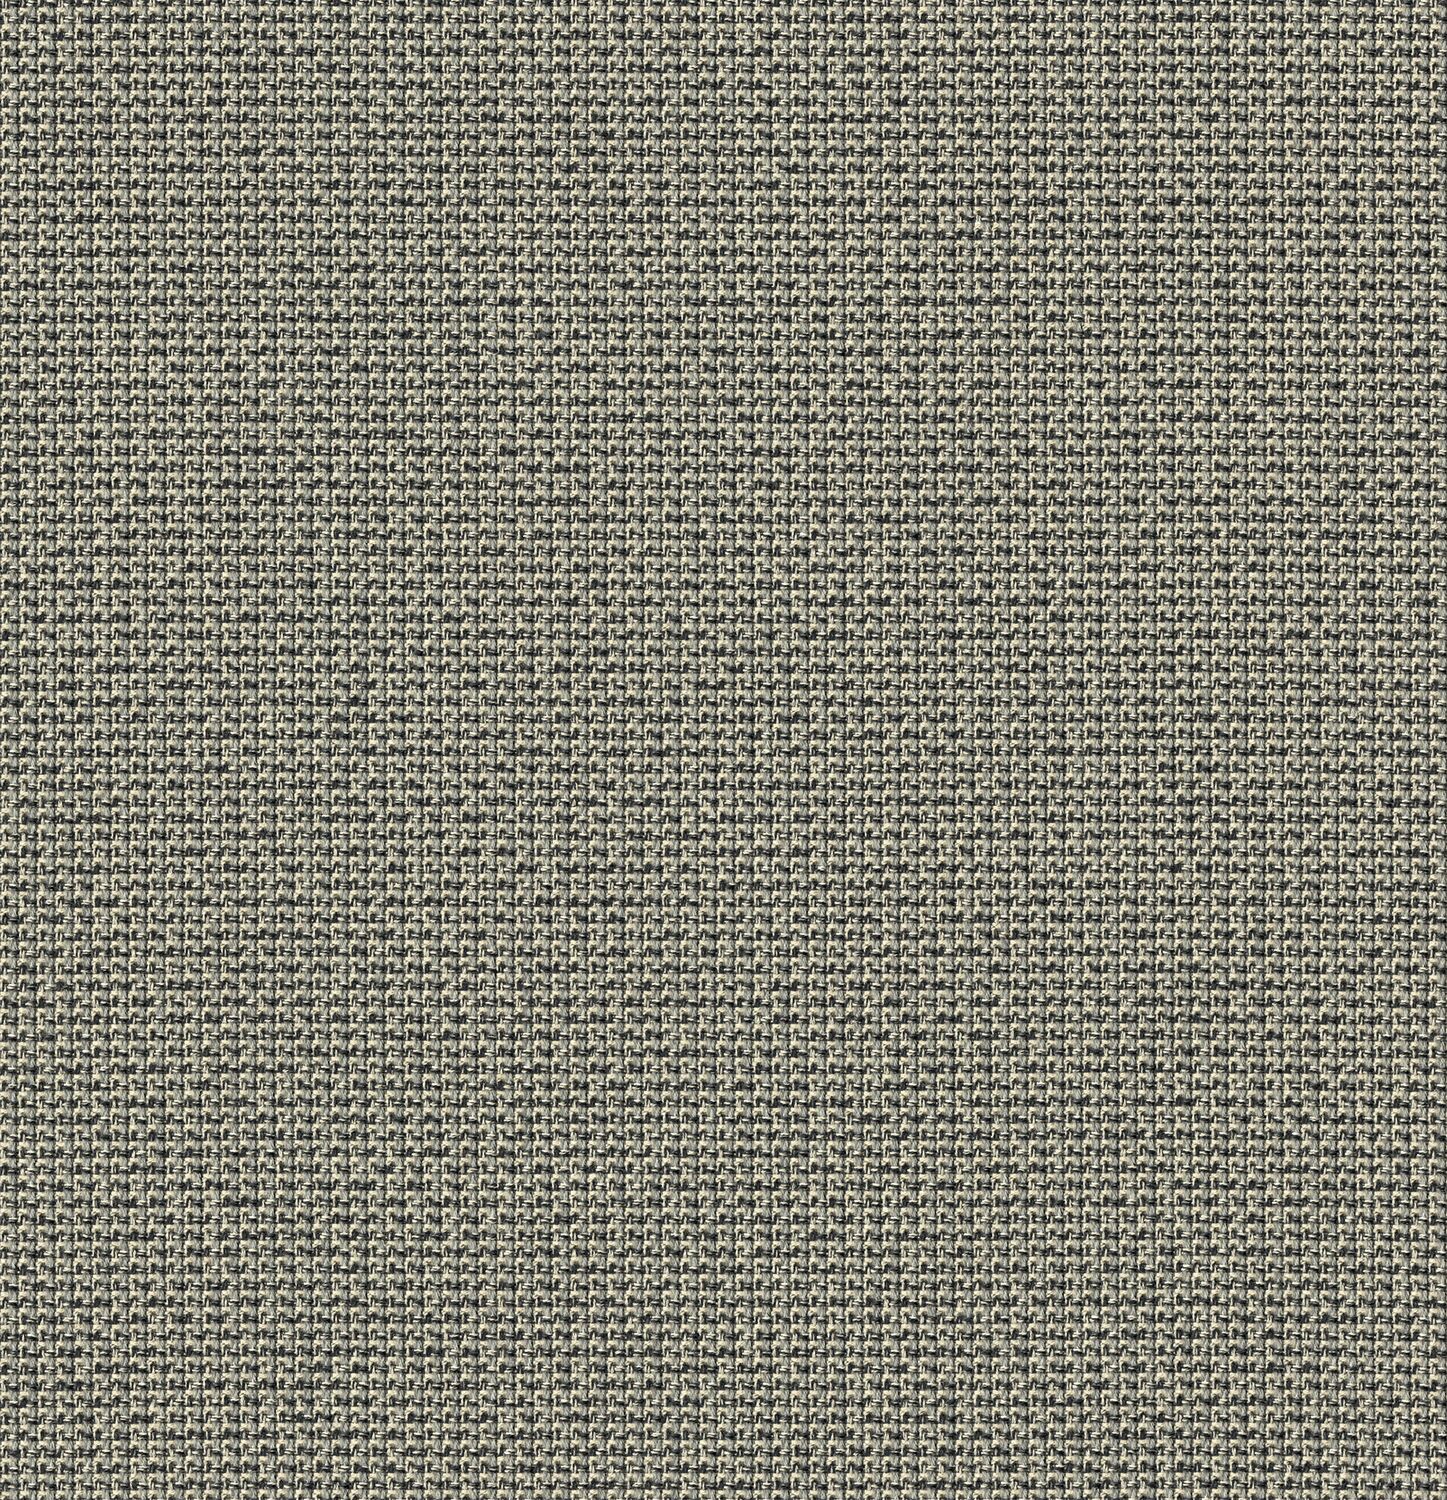 Barberpole Basket - Wisp - 4114 - 04 Tileable Swatches